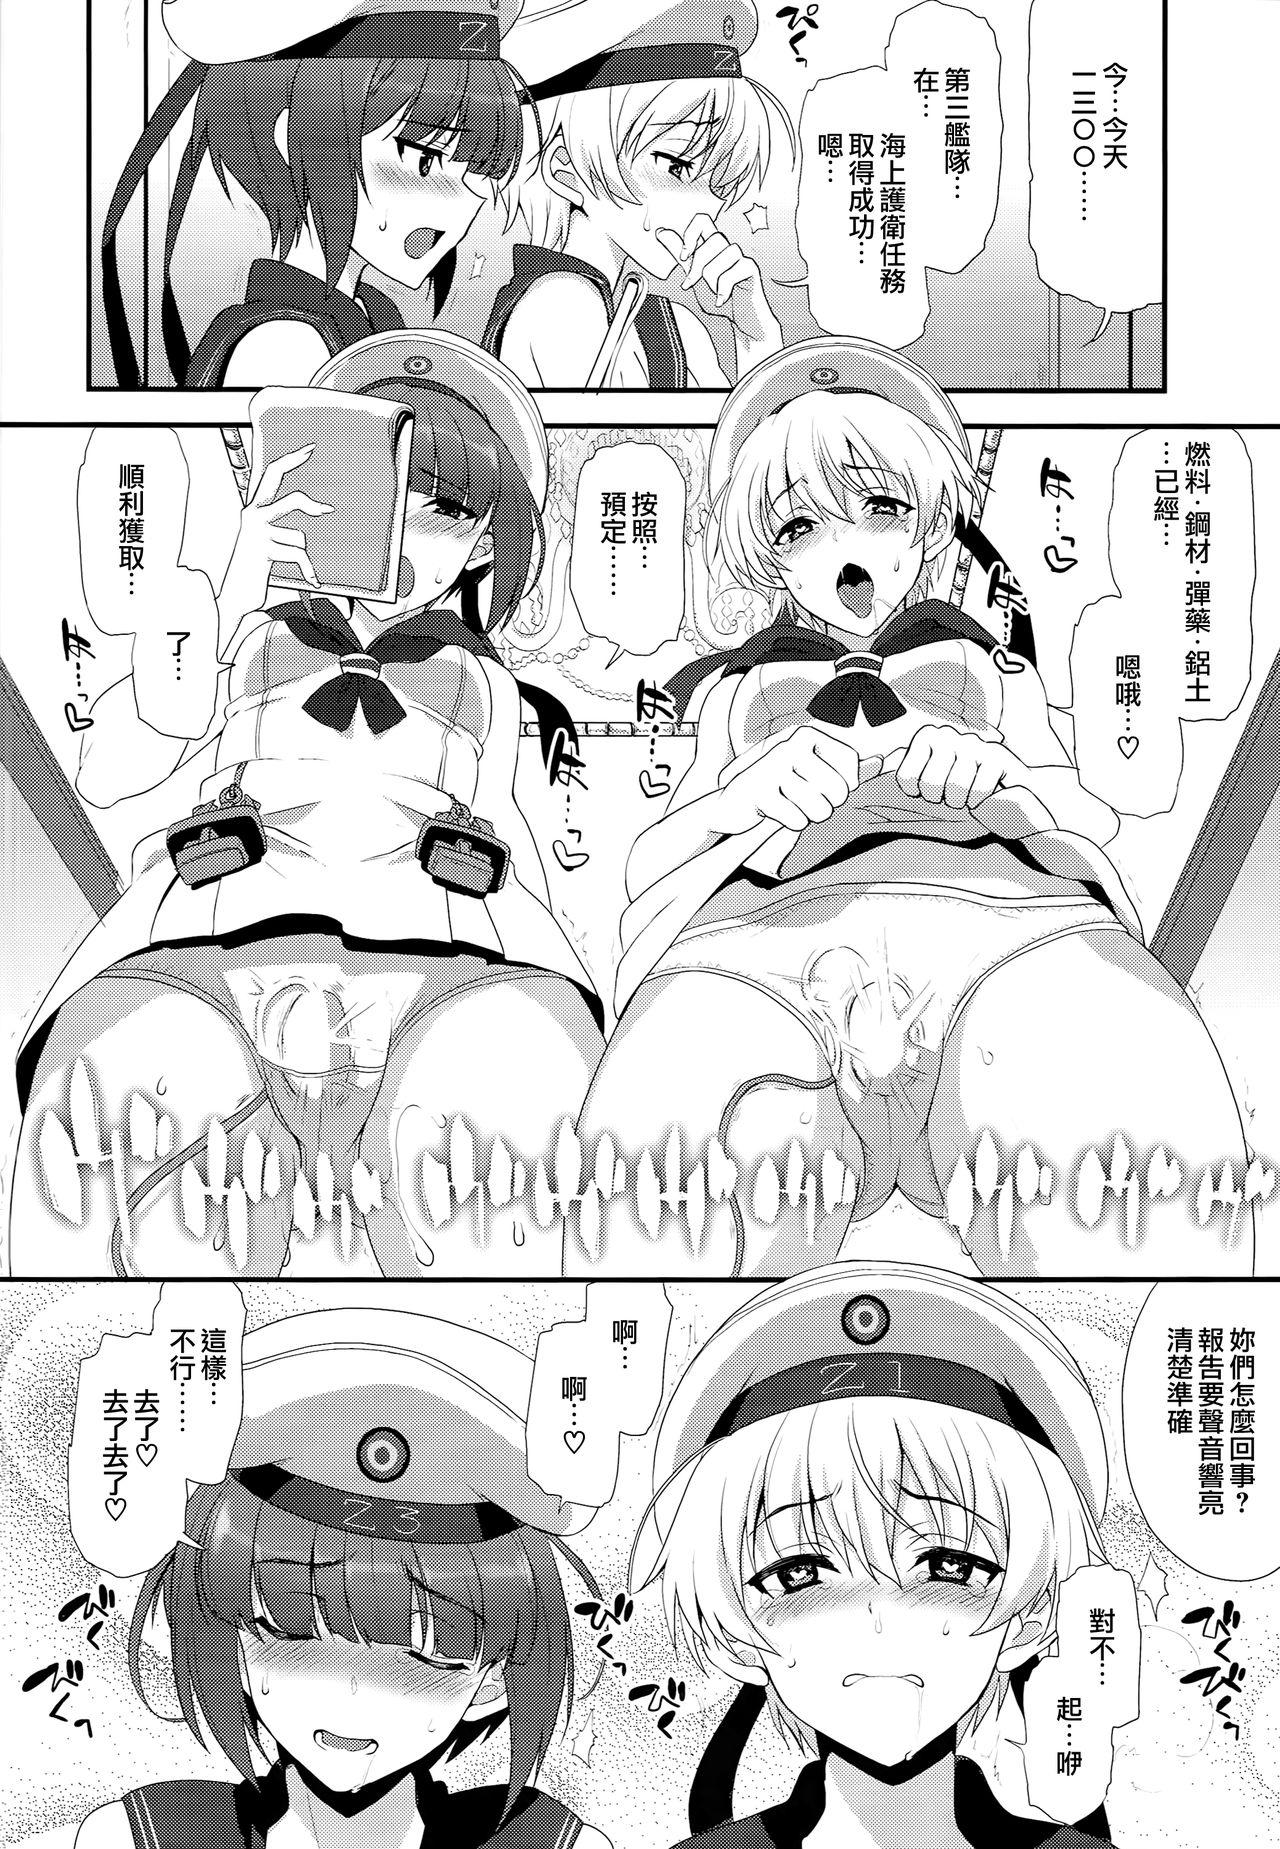 Awesome Apfelschorle - Kantai collection Masterbate - Page 12